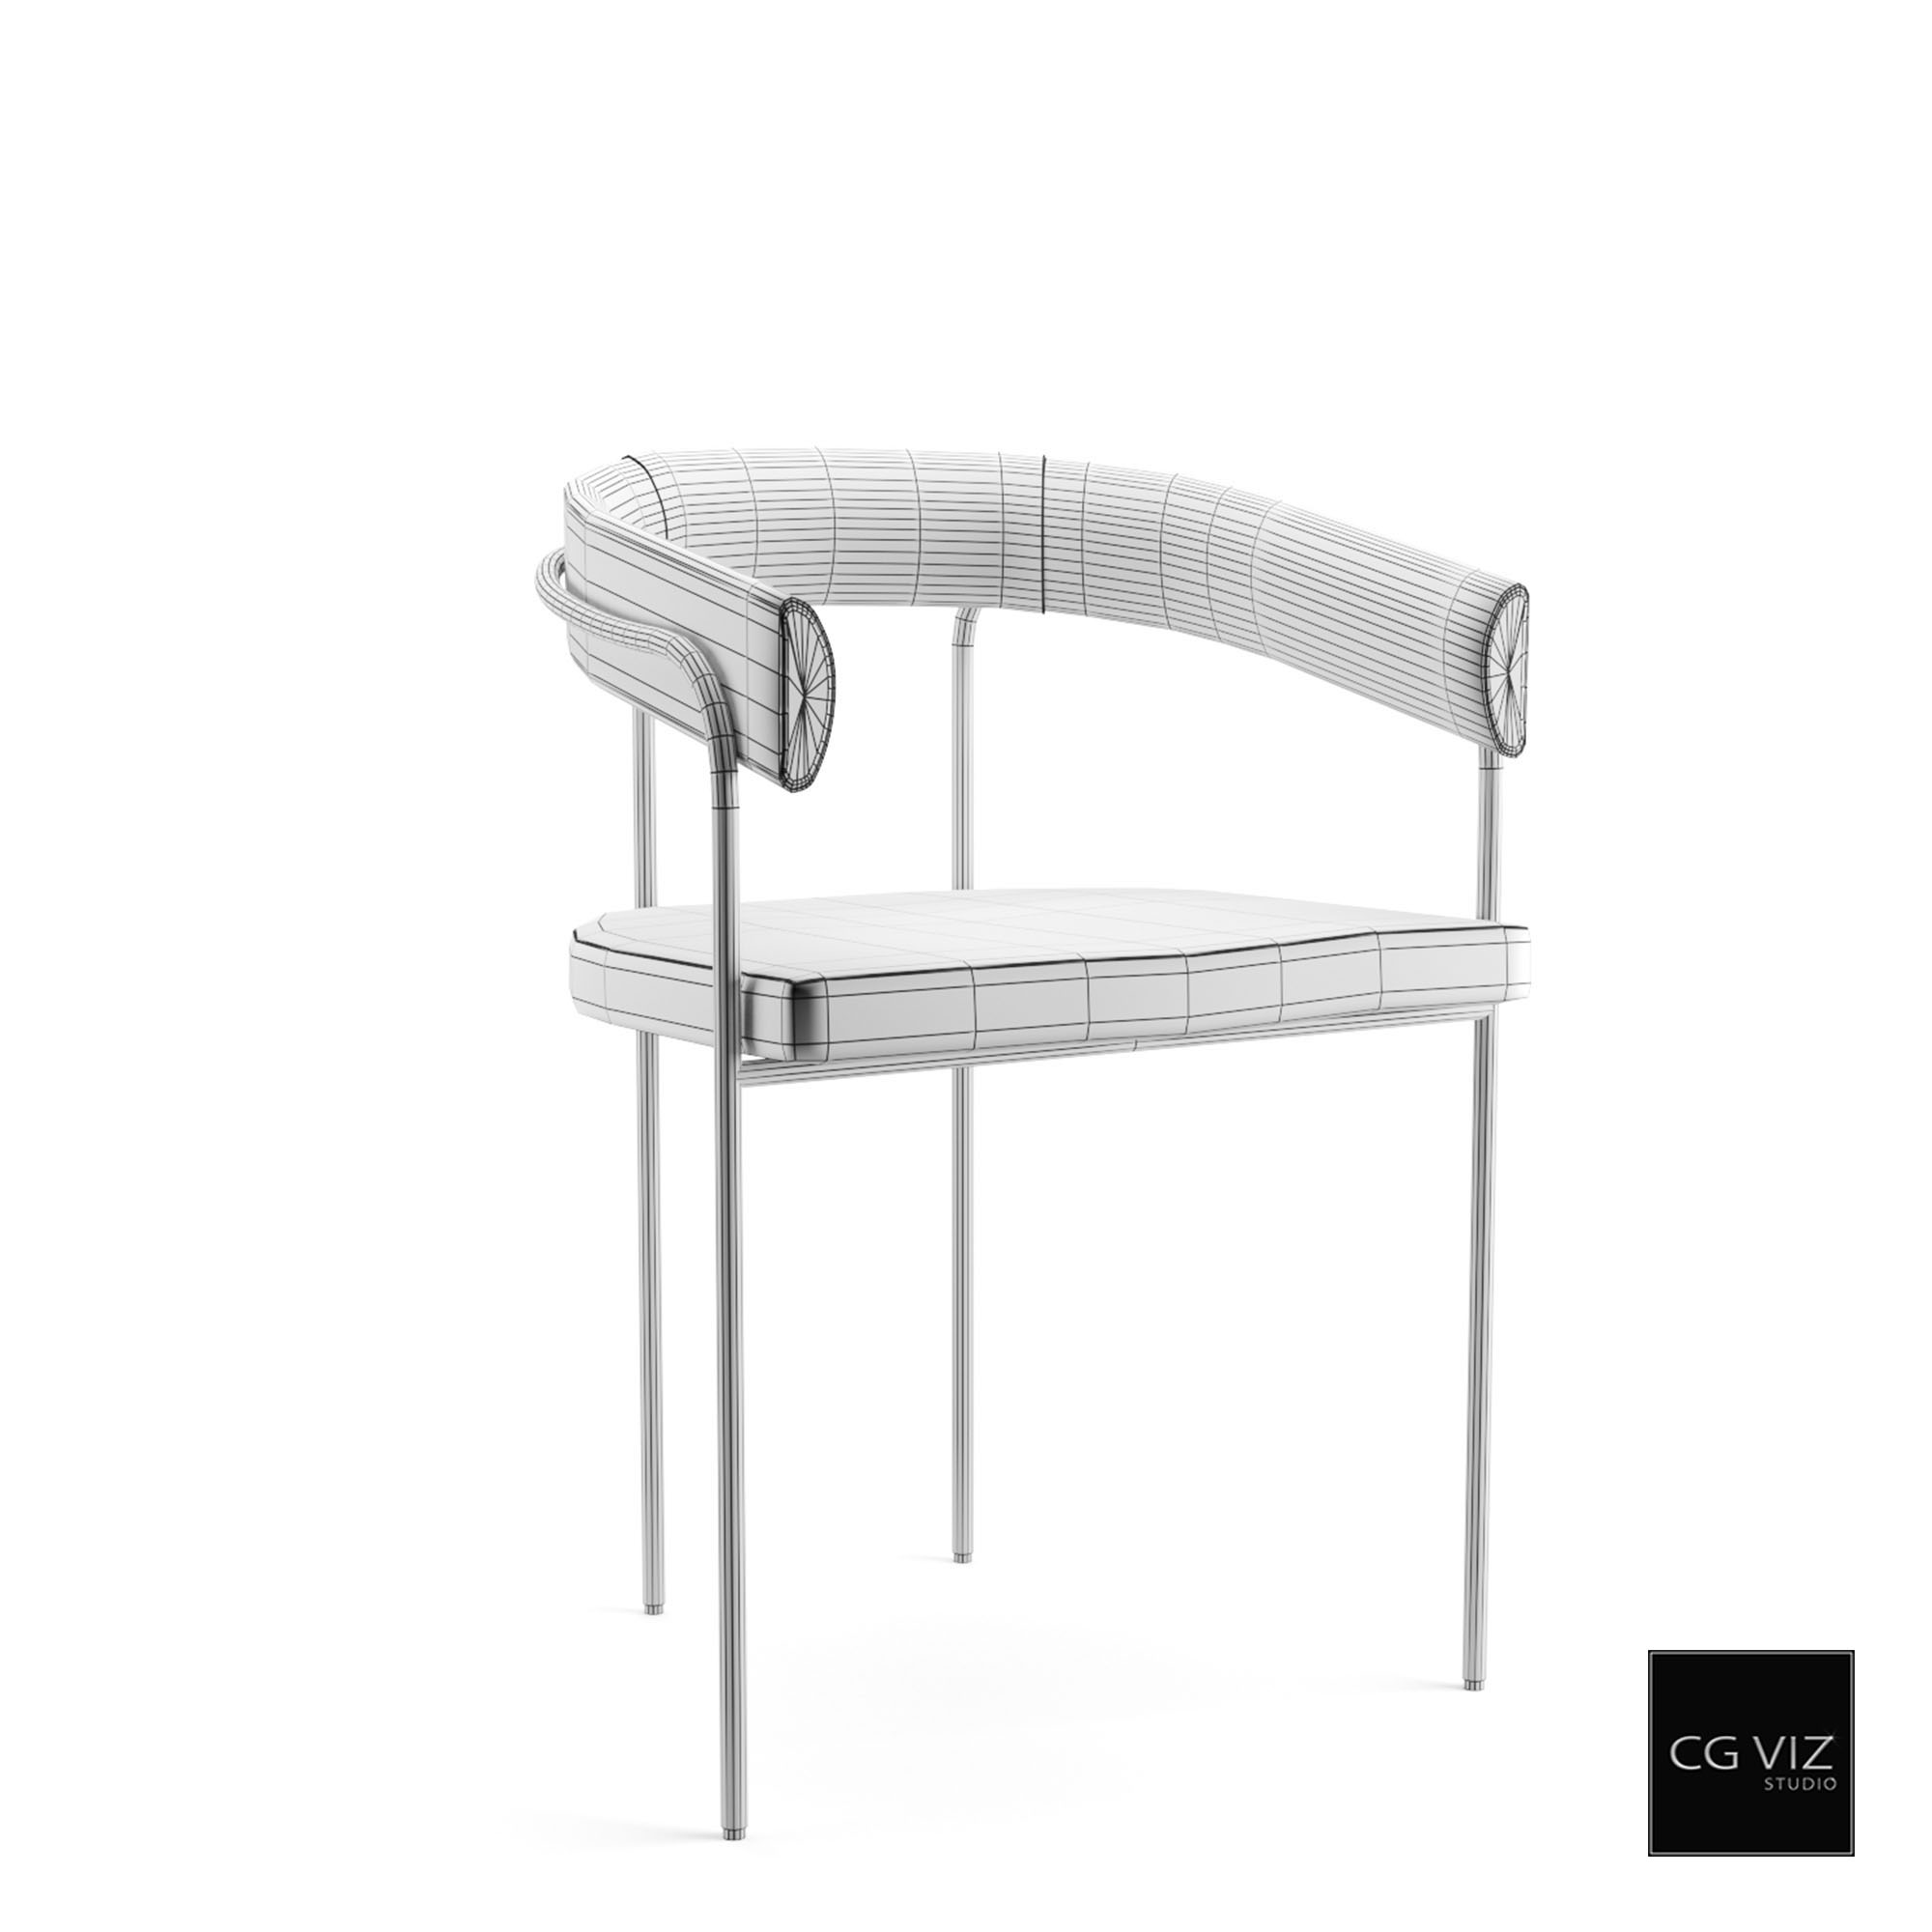 Wireframe View of Baxter C Chair 3D Model by CG Viz Studio